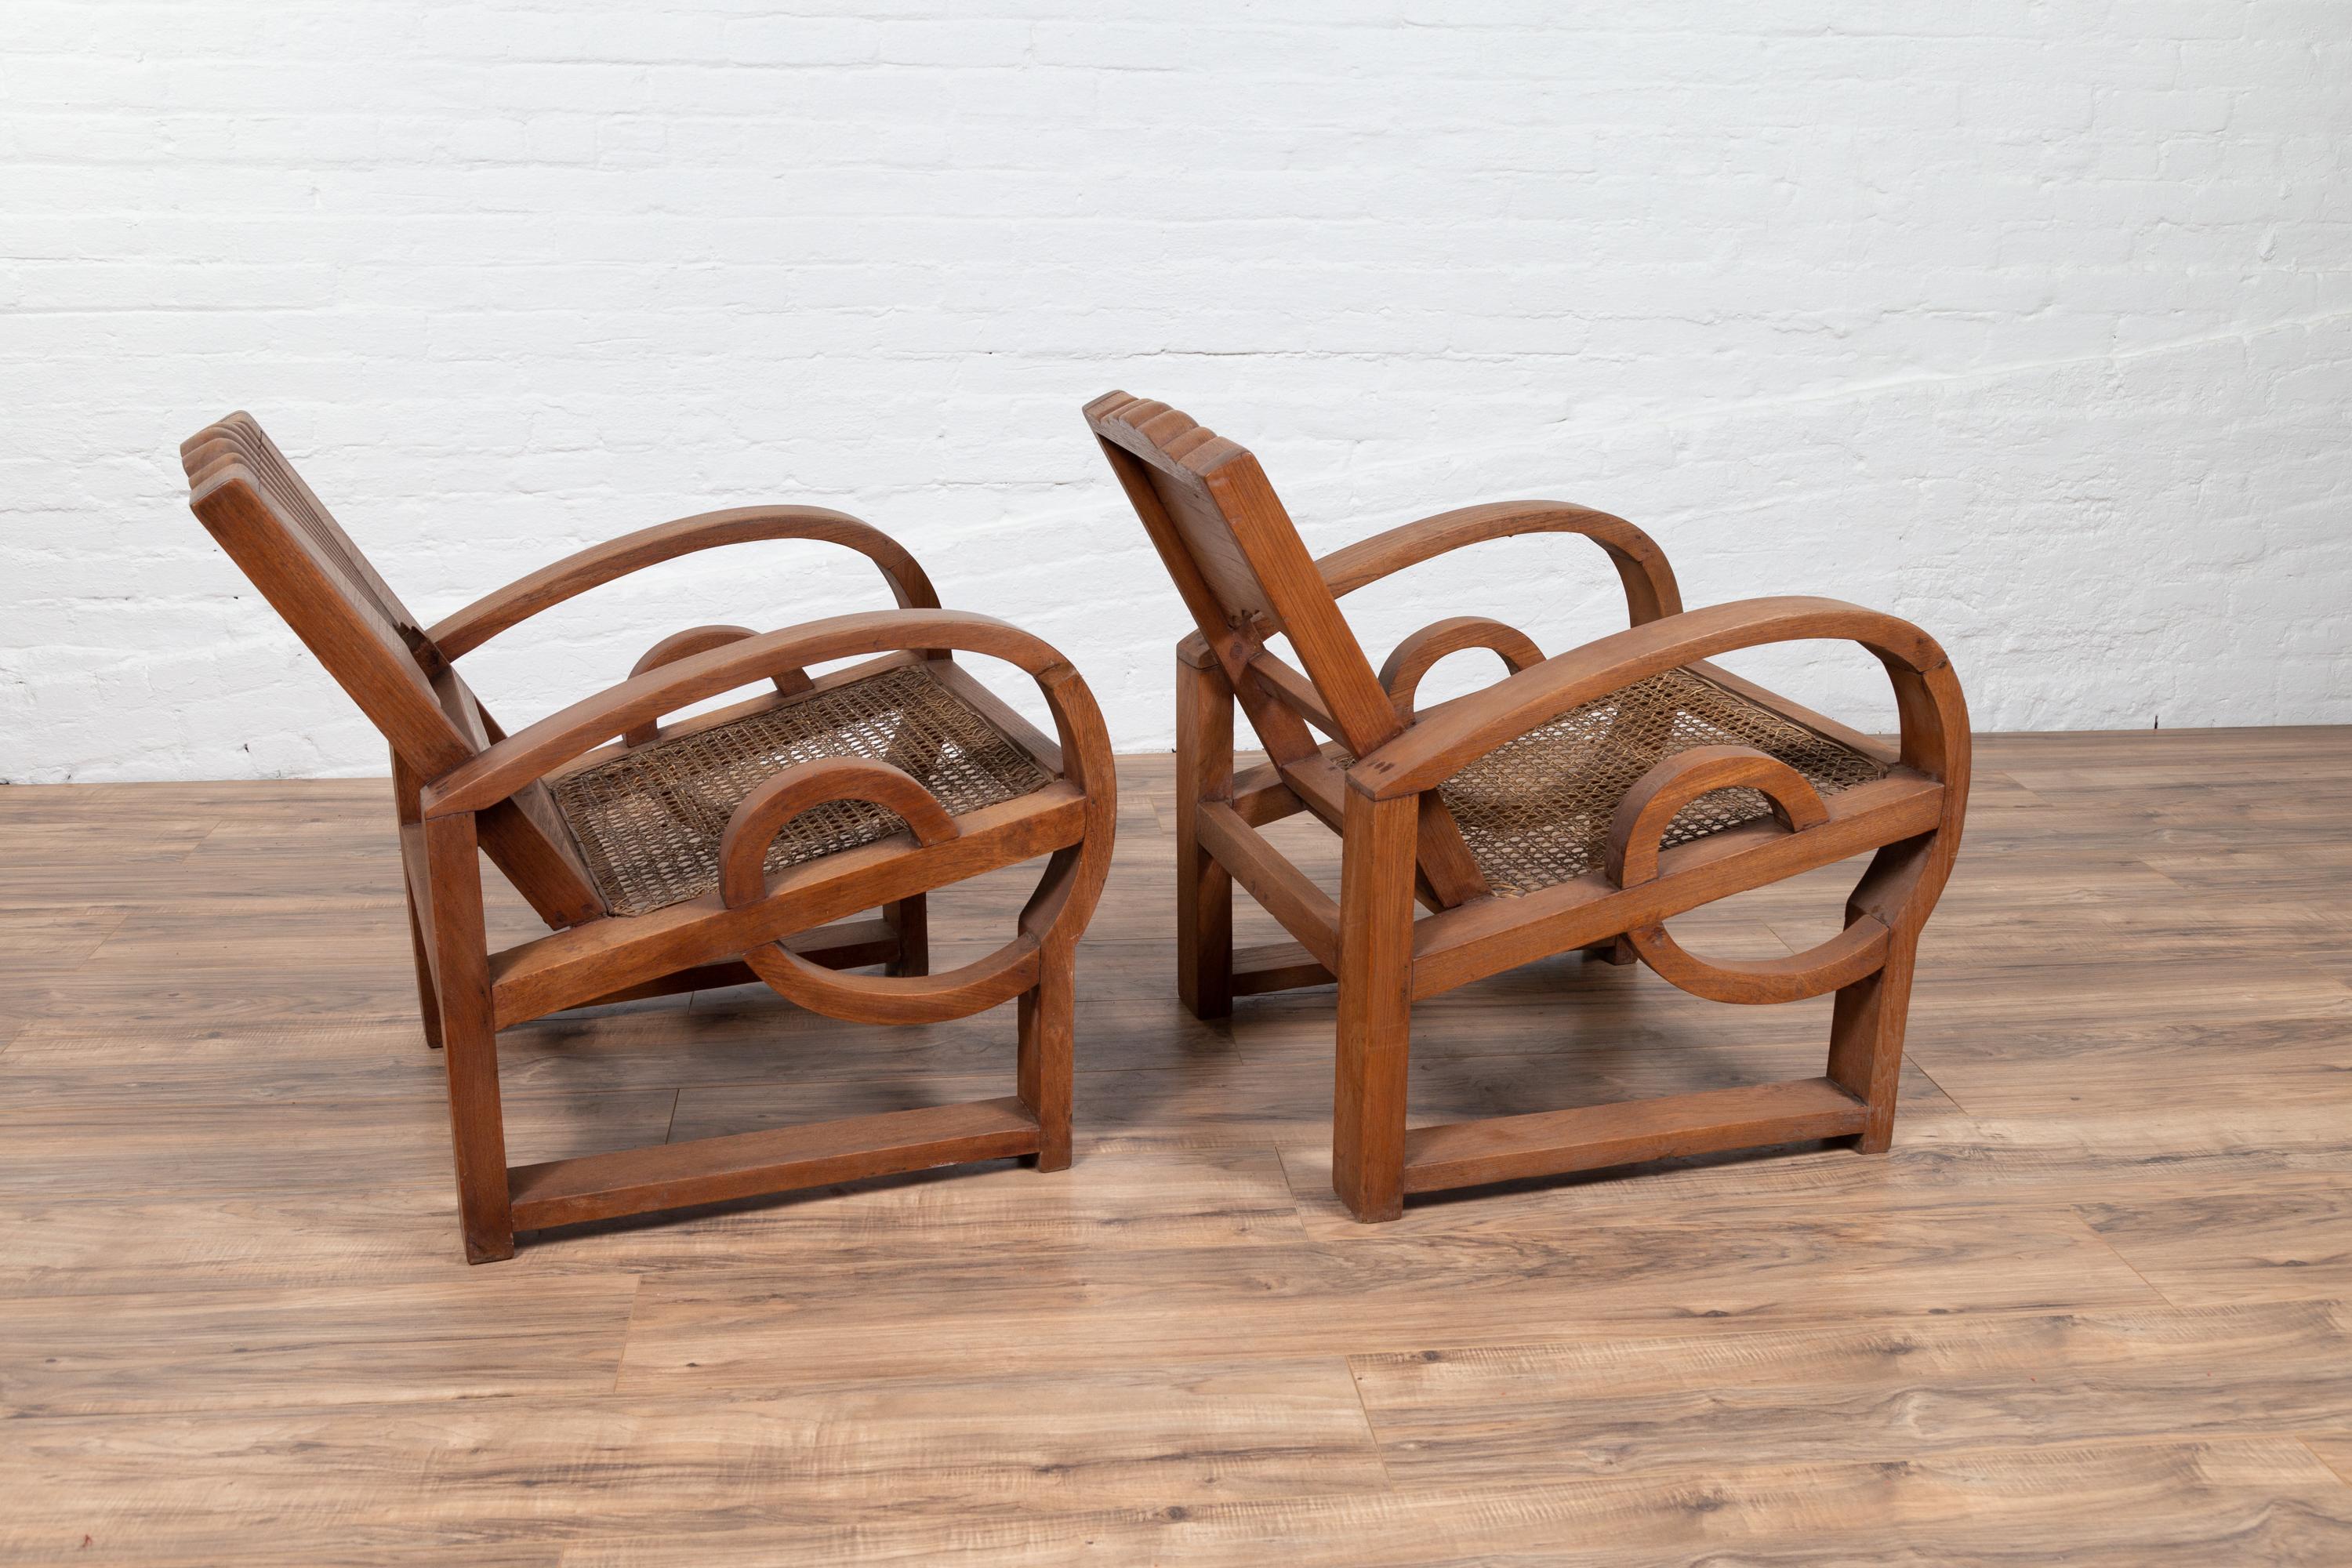 Pair of Teak Wood Country Chairs from Madura with Rattan Seats and Looping Arms 5